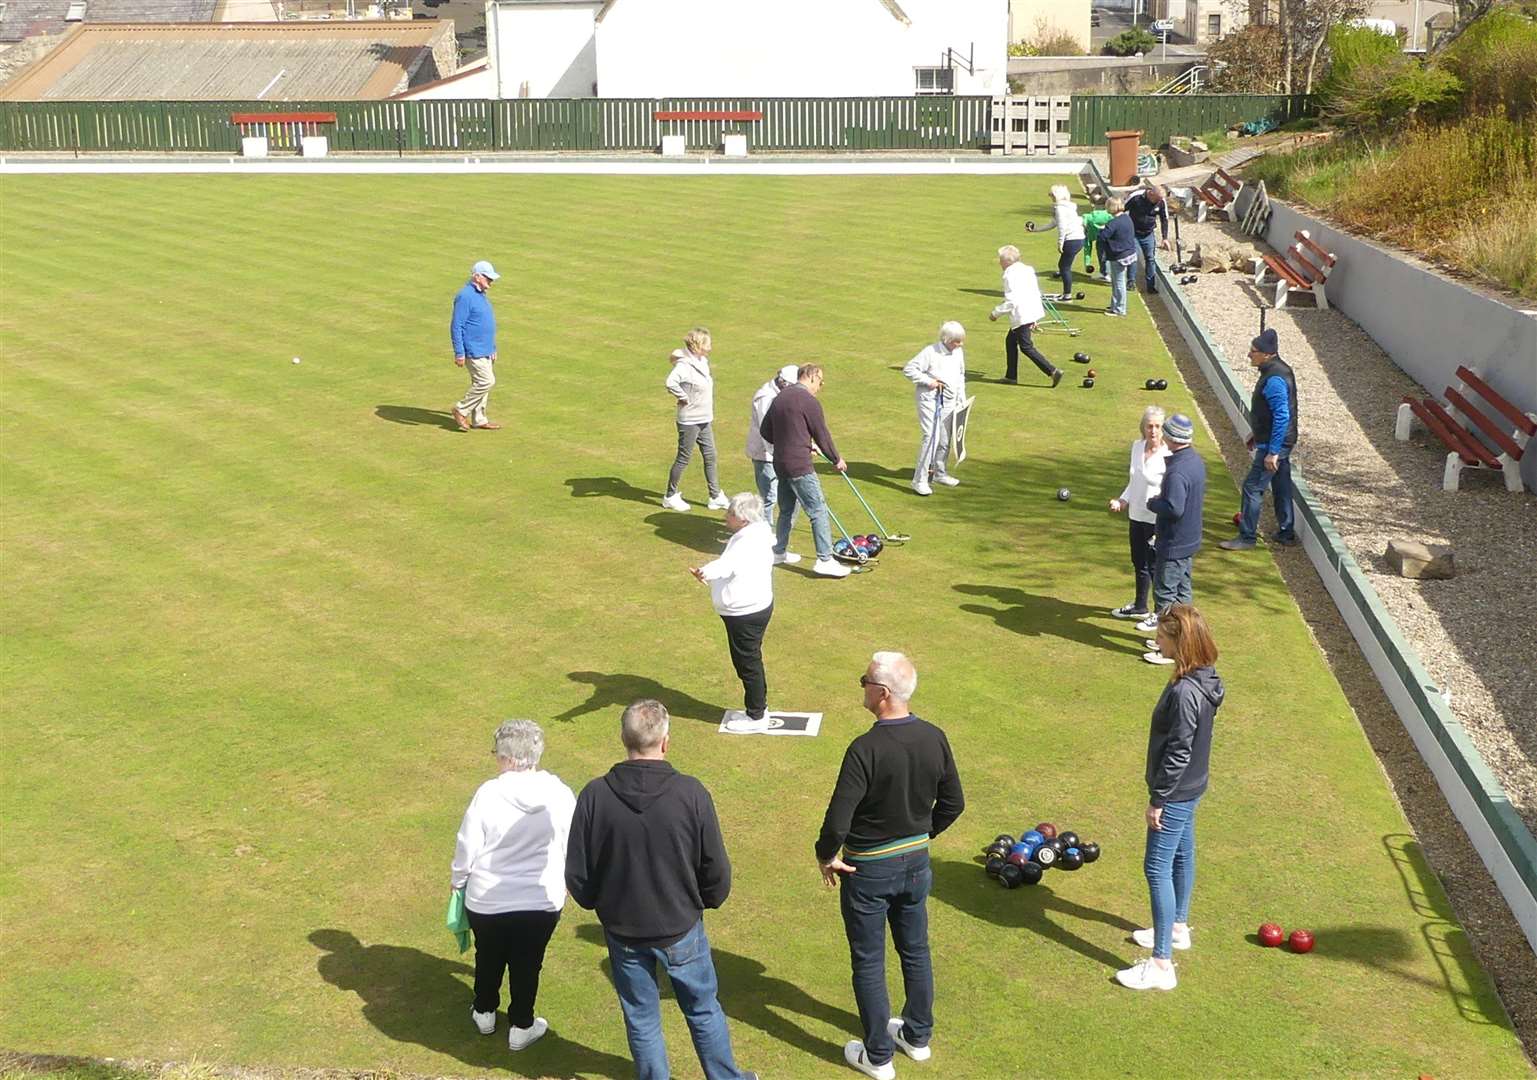 A good turn-out of bowlers at Findochty for the first day of the season. Photo: Peter MacDonald